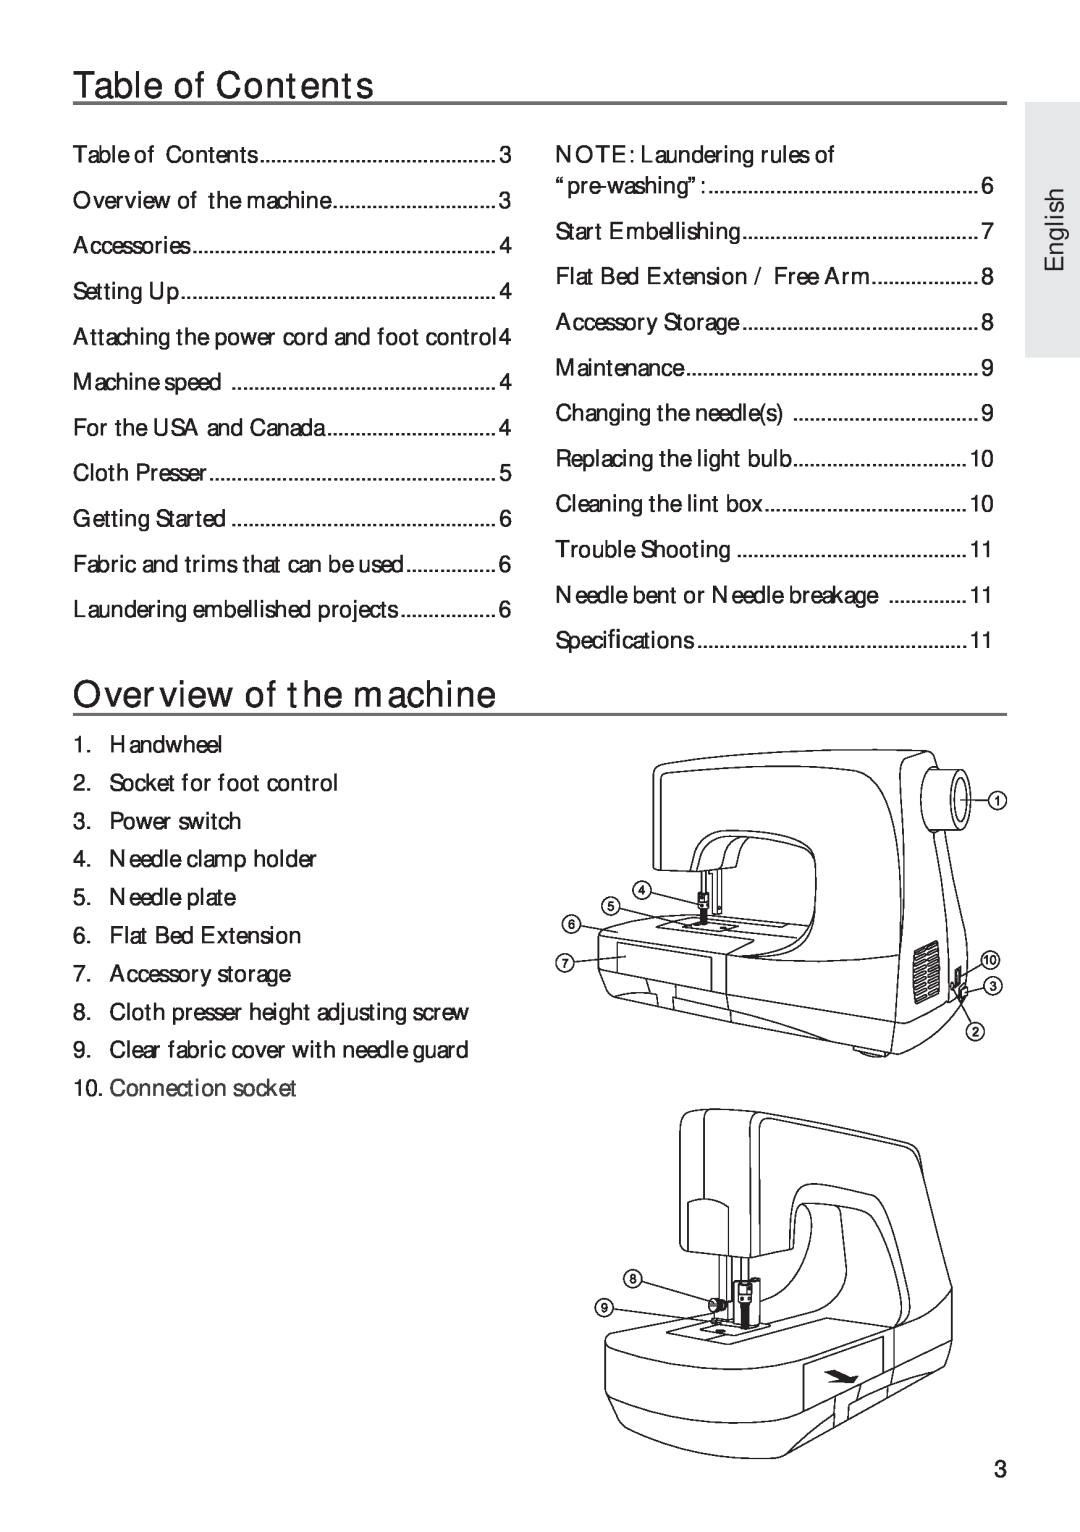 Pfaff 350P owner manual Table of Contents, Overview of the machine, English 